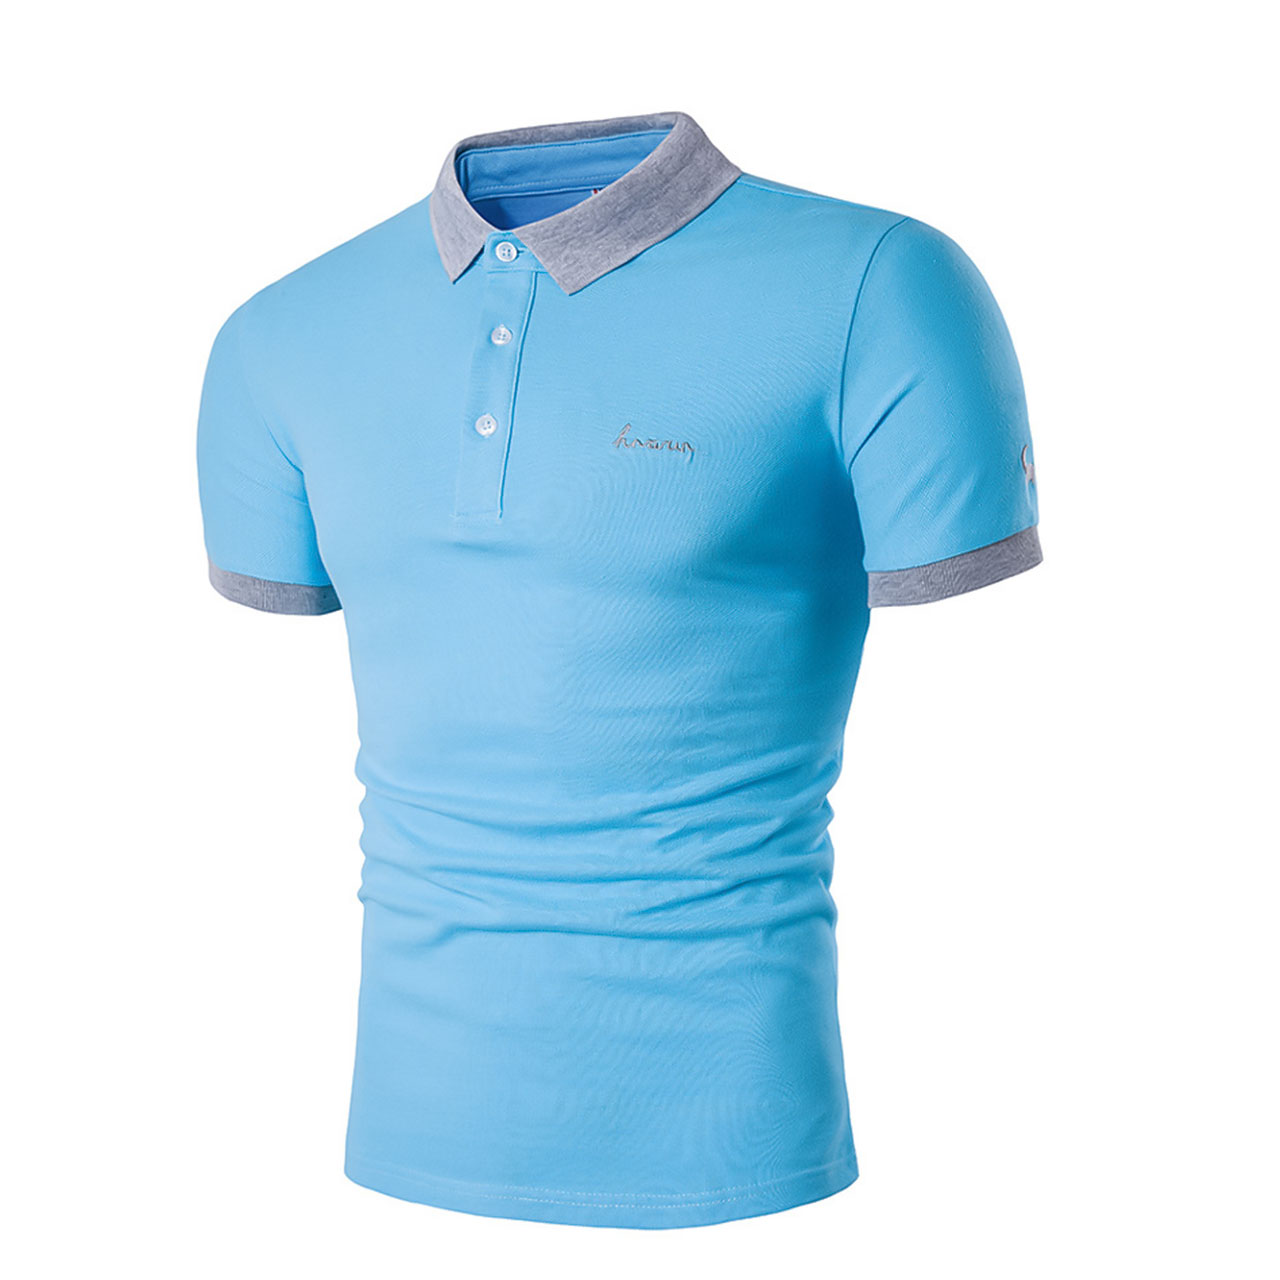 Active Solid Collared Cotton Slim Fit Light Blue Polo Shirt Mens Daily Weekend Summer Sweatshirt